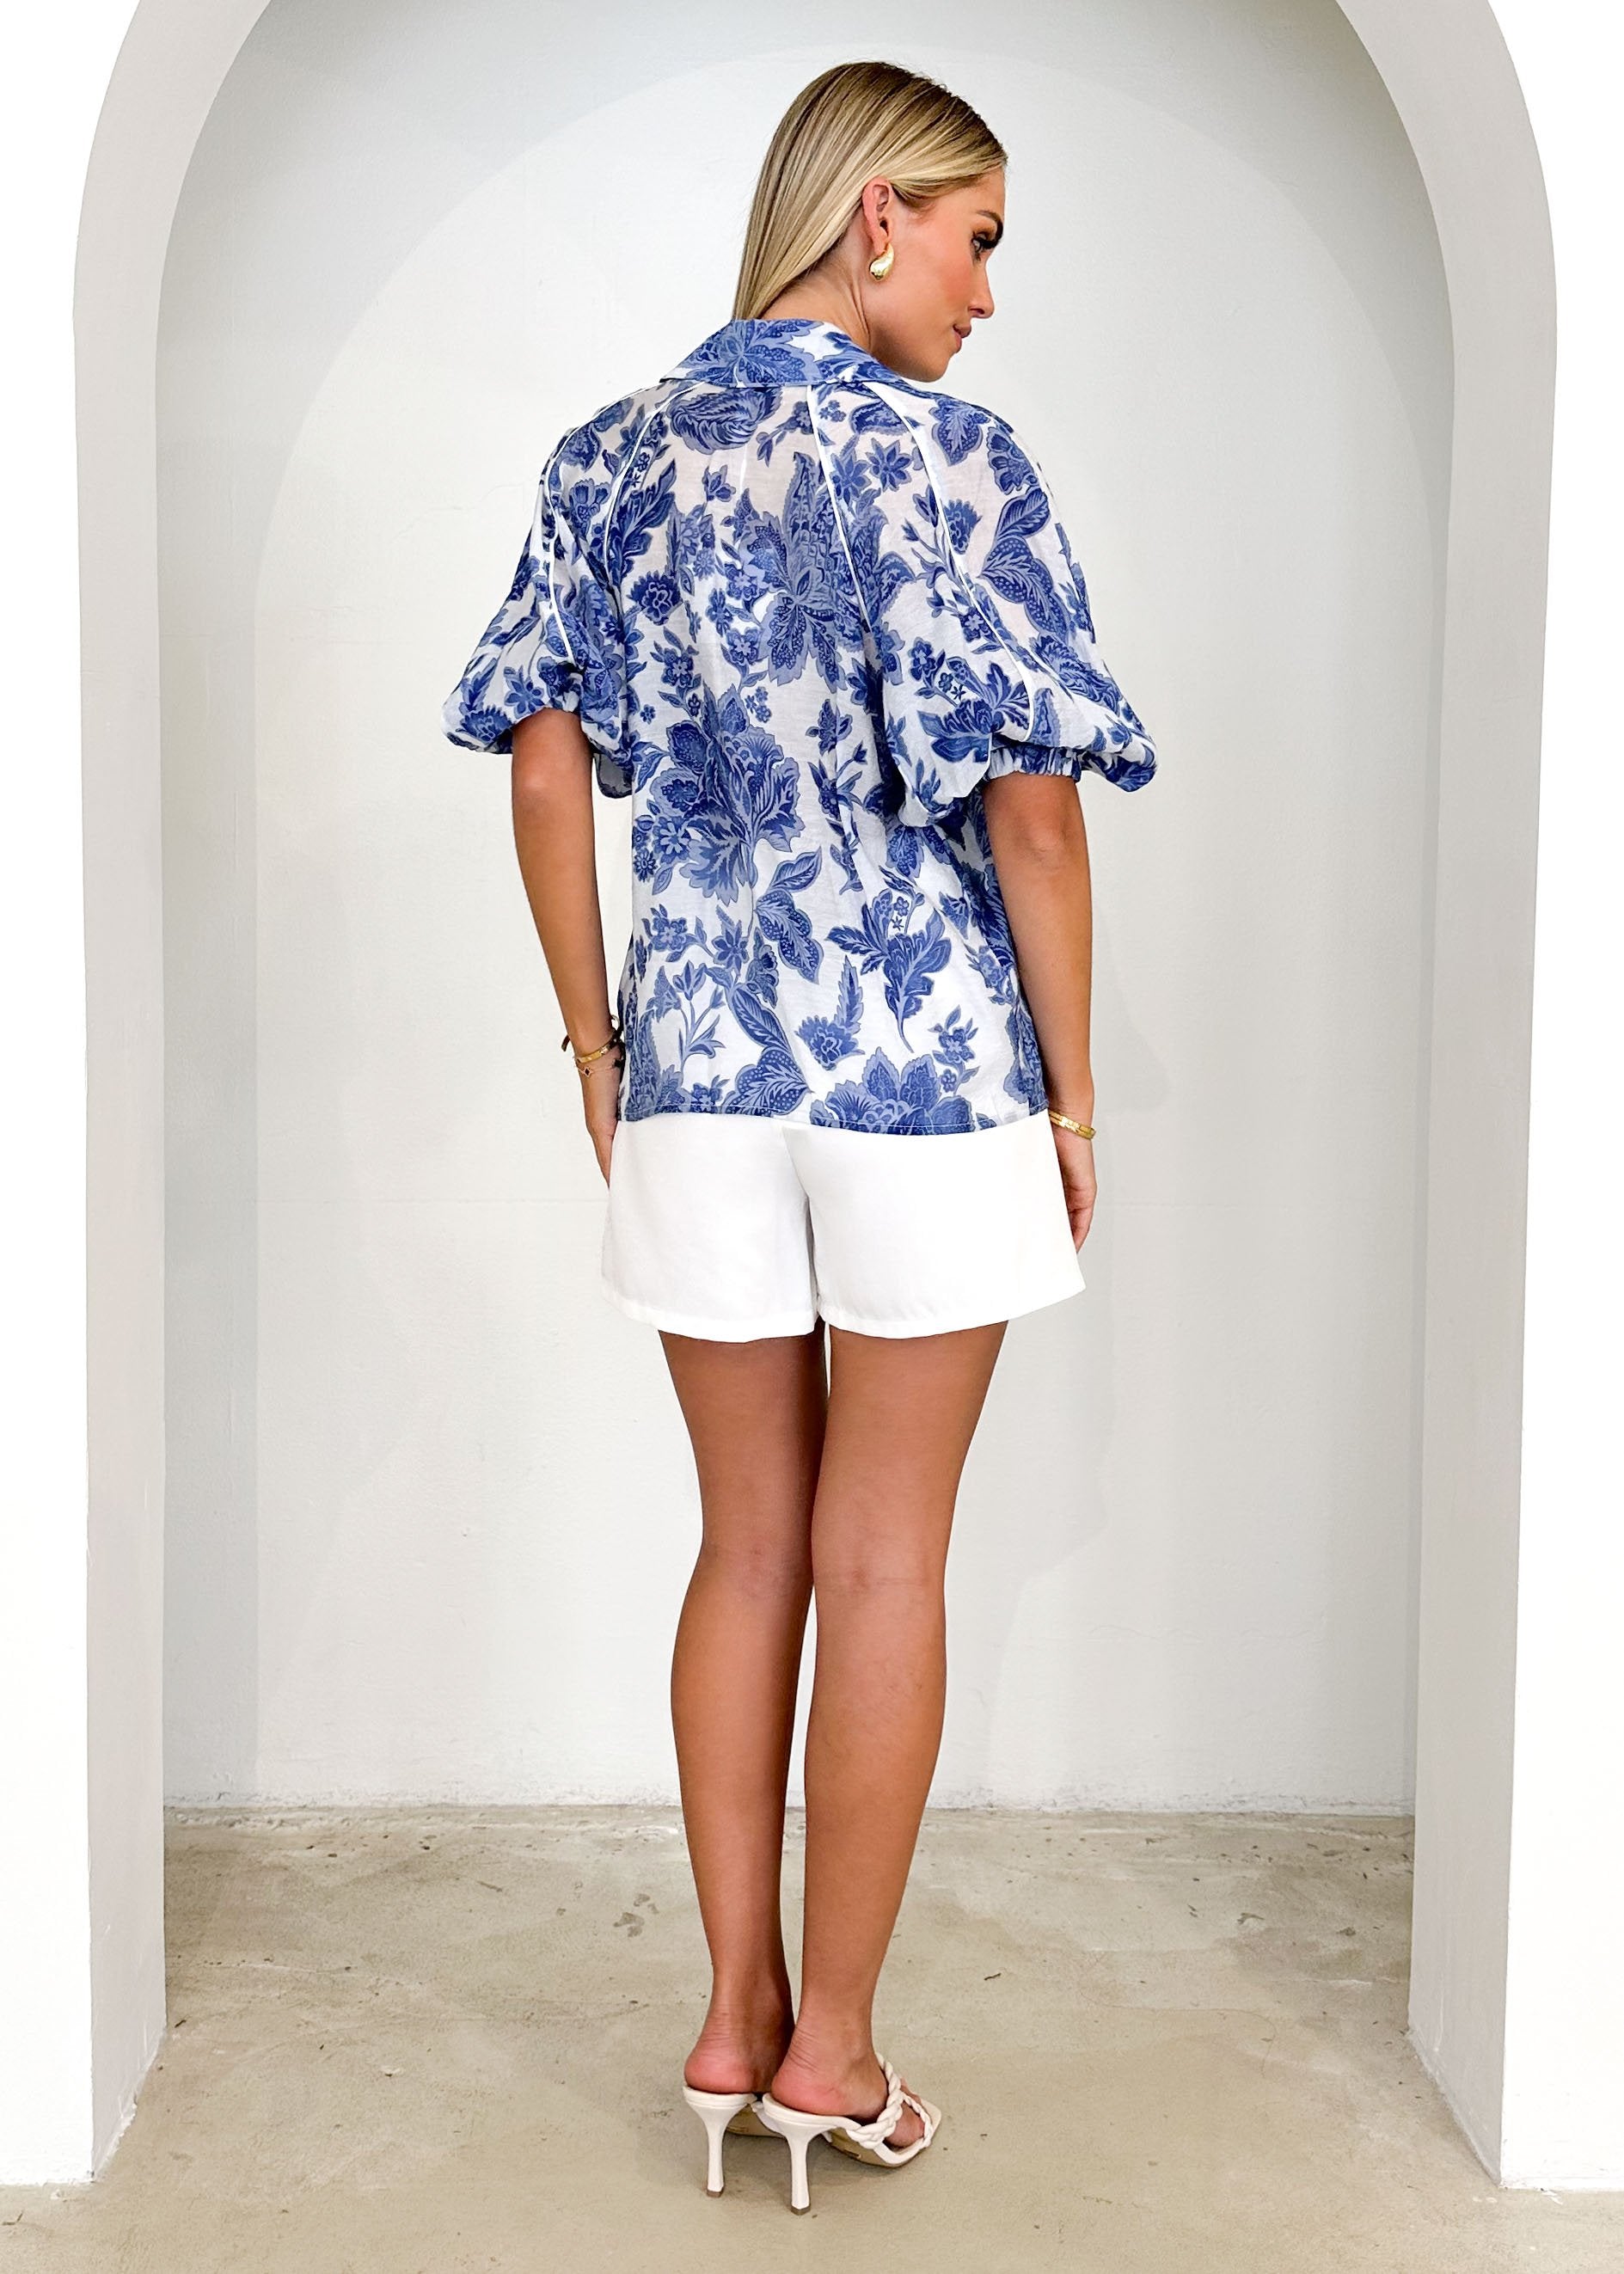 Treely Shirt - Blue Floral